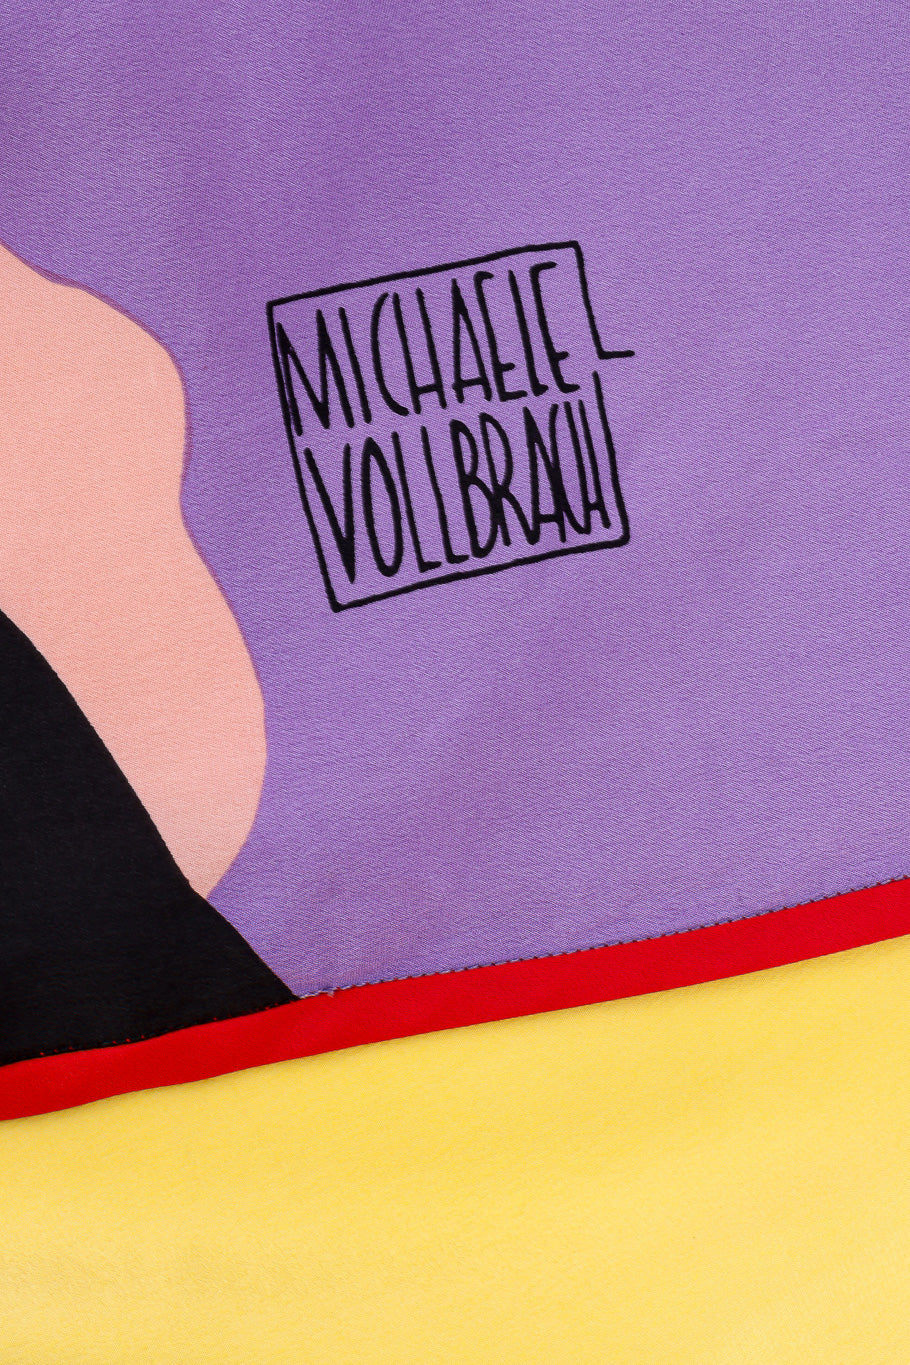 Whimsical blouse with cape attached by Michaele Vollbracht Logo Designer close-up @recessla